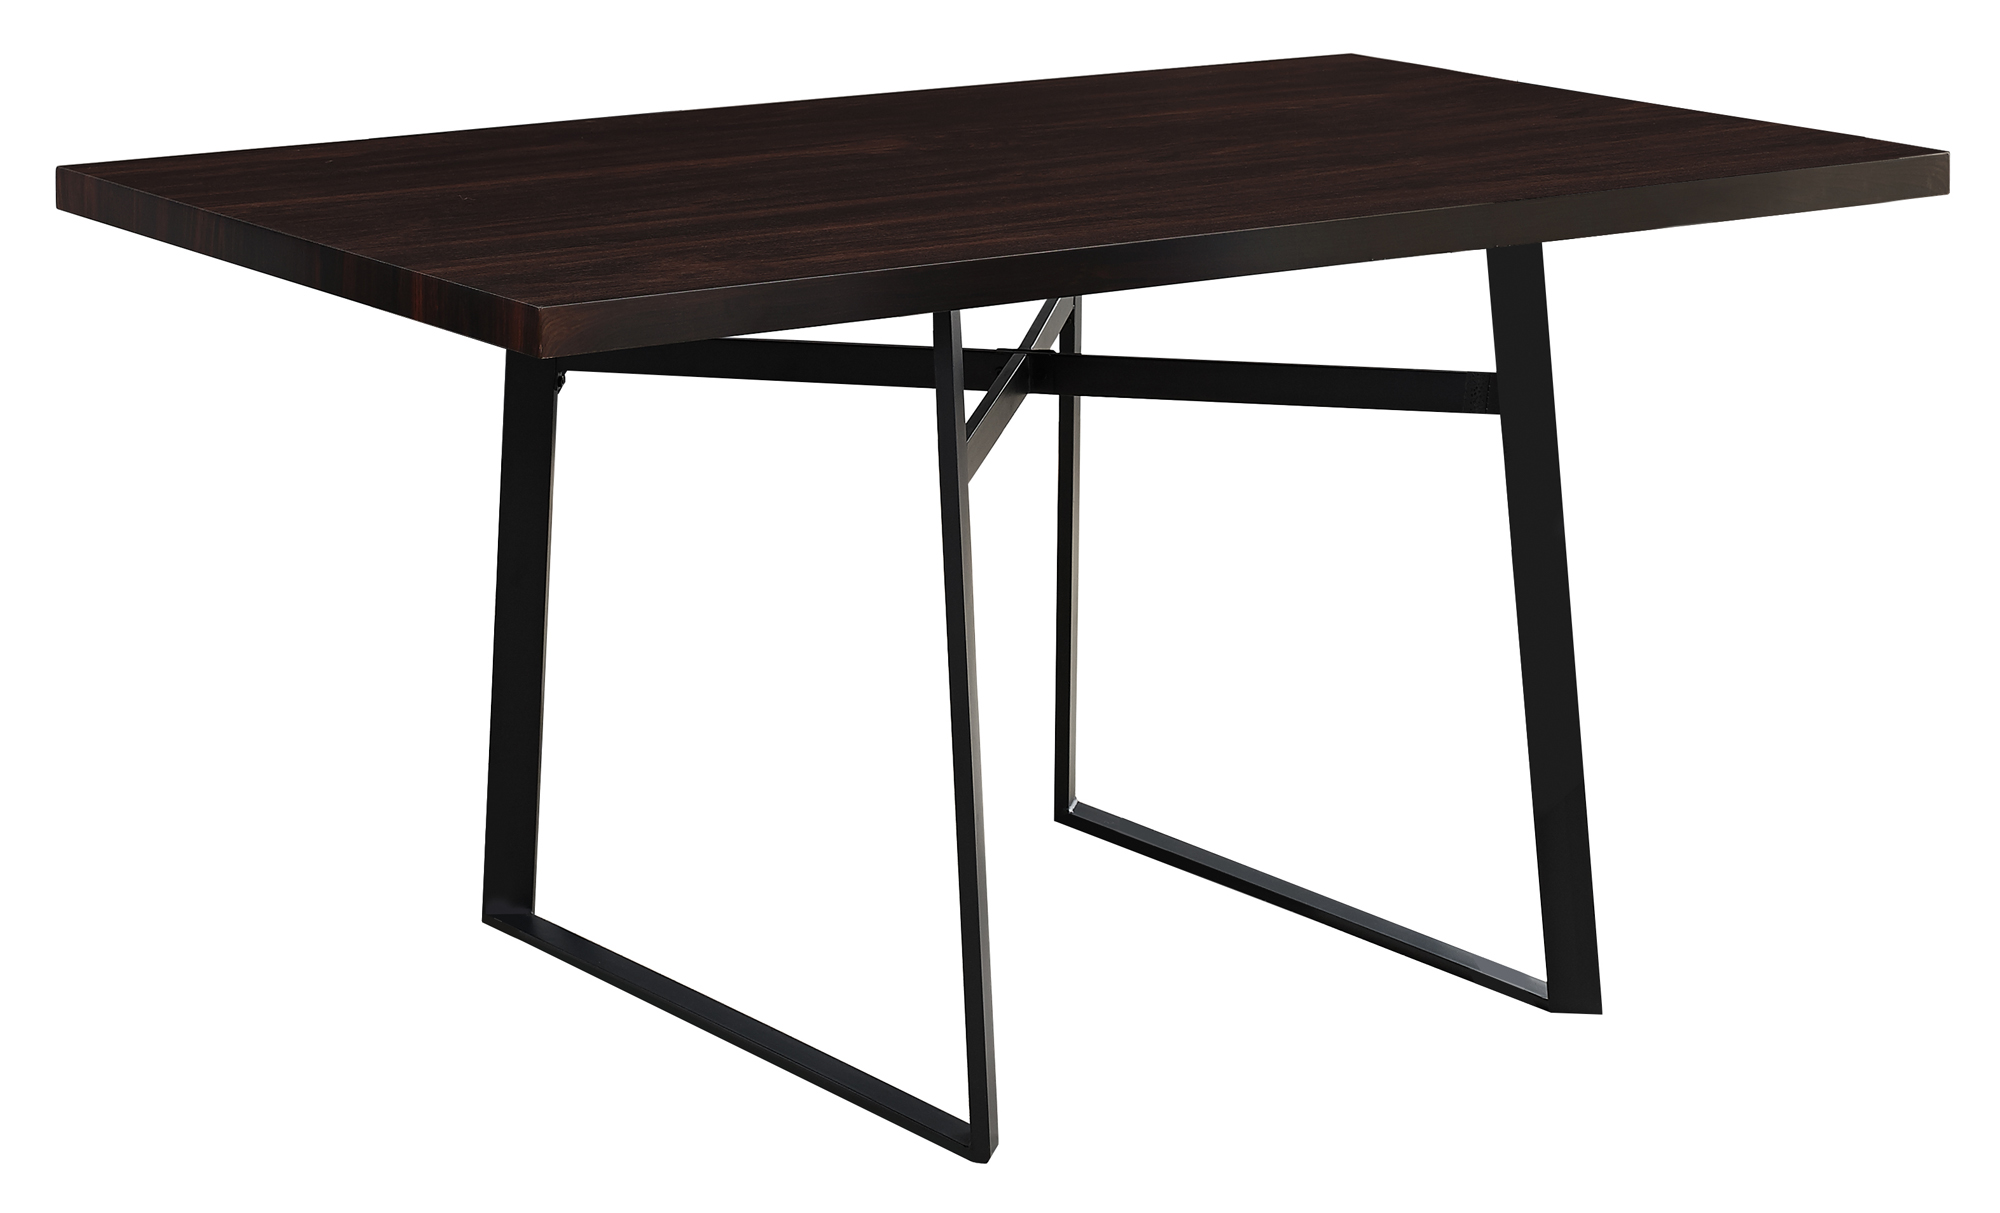 36" x 60" x 30" Cappuccino Black HollowCore Particle Board Metal Dining Table